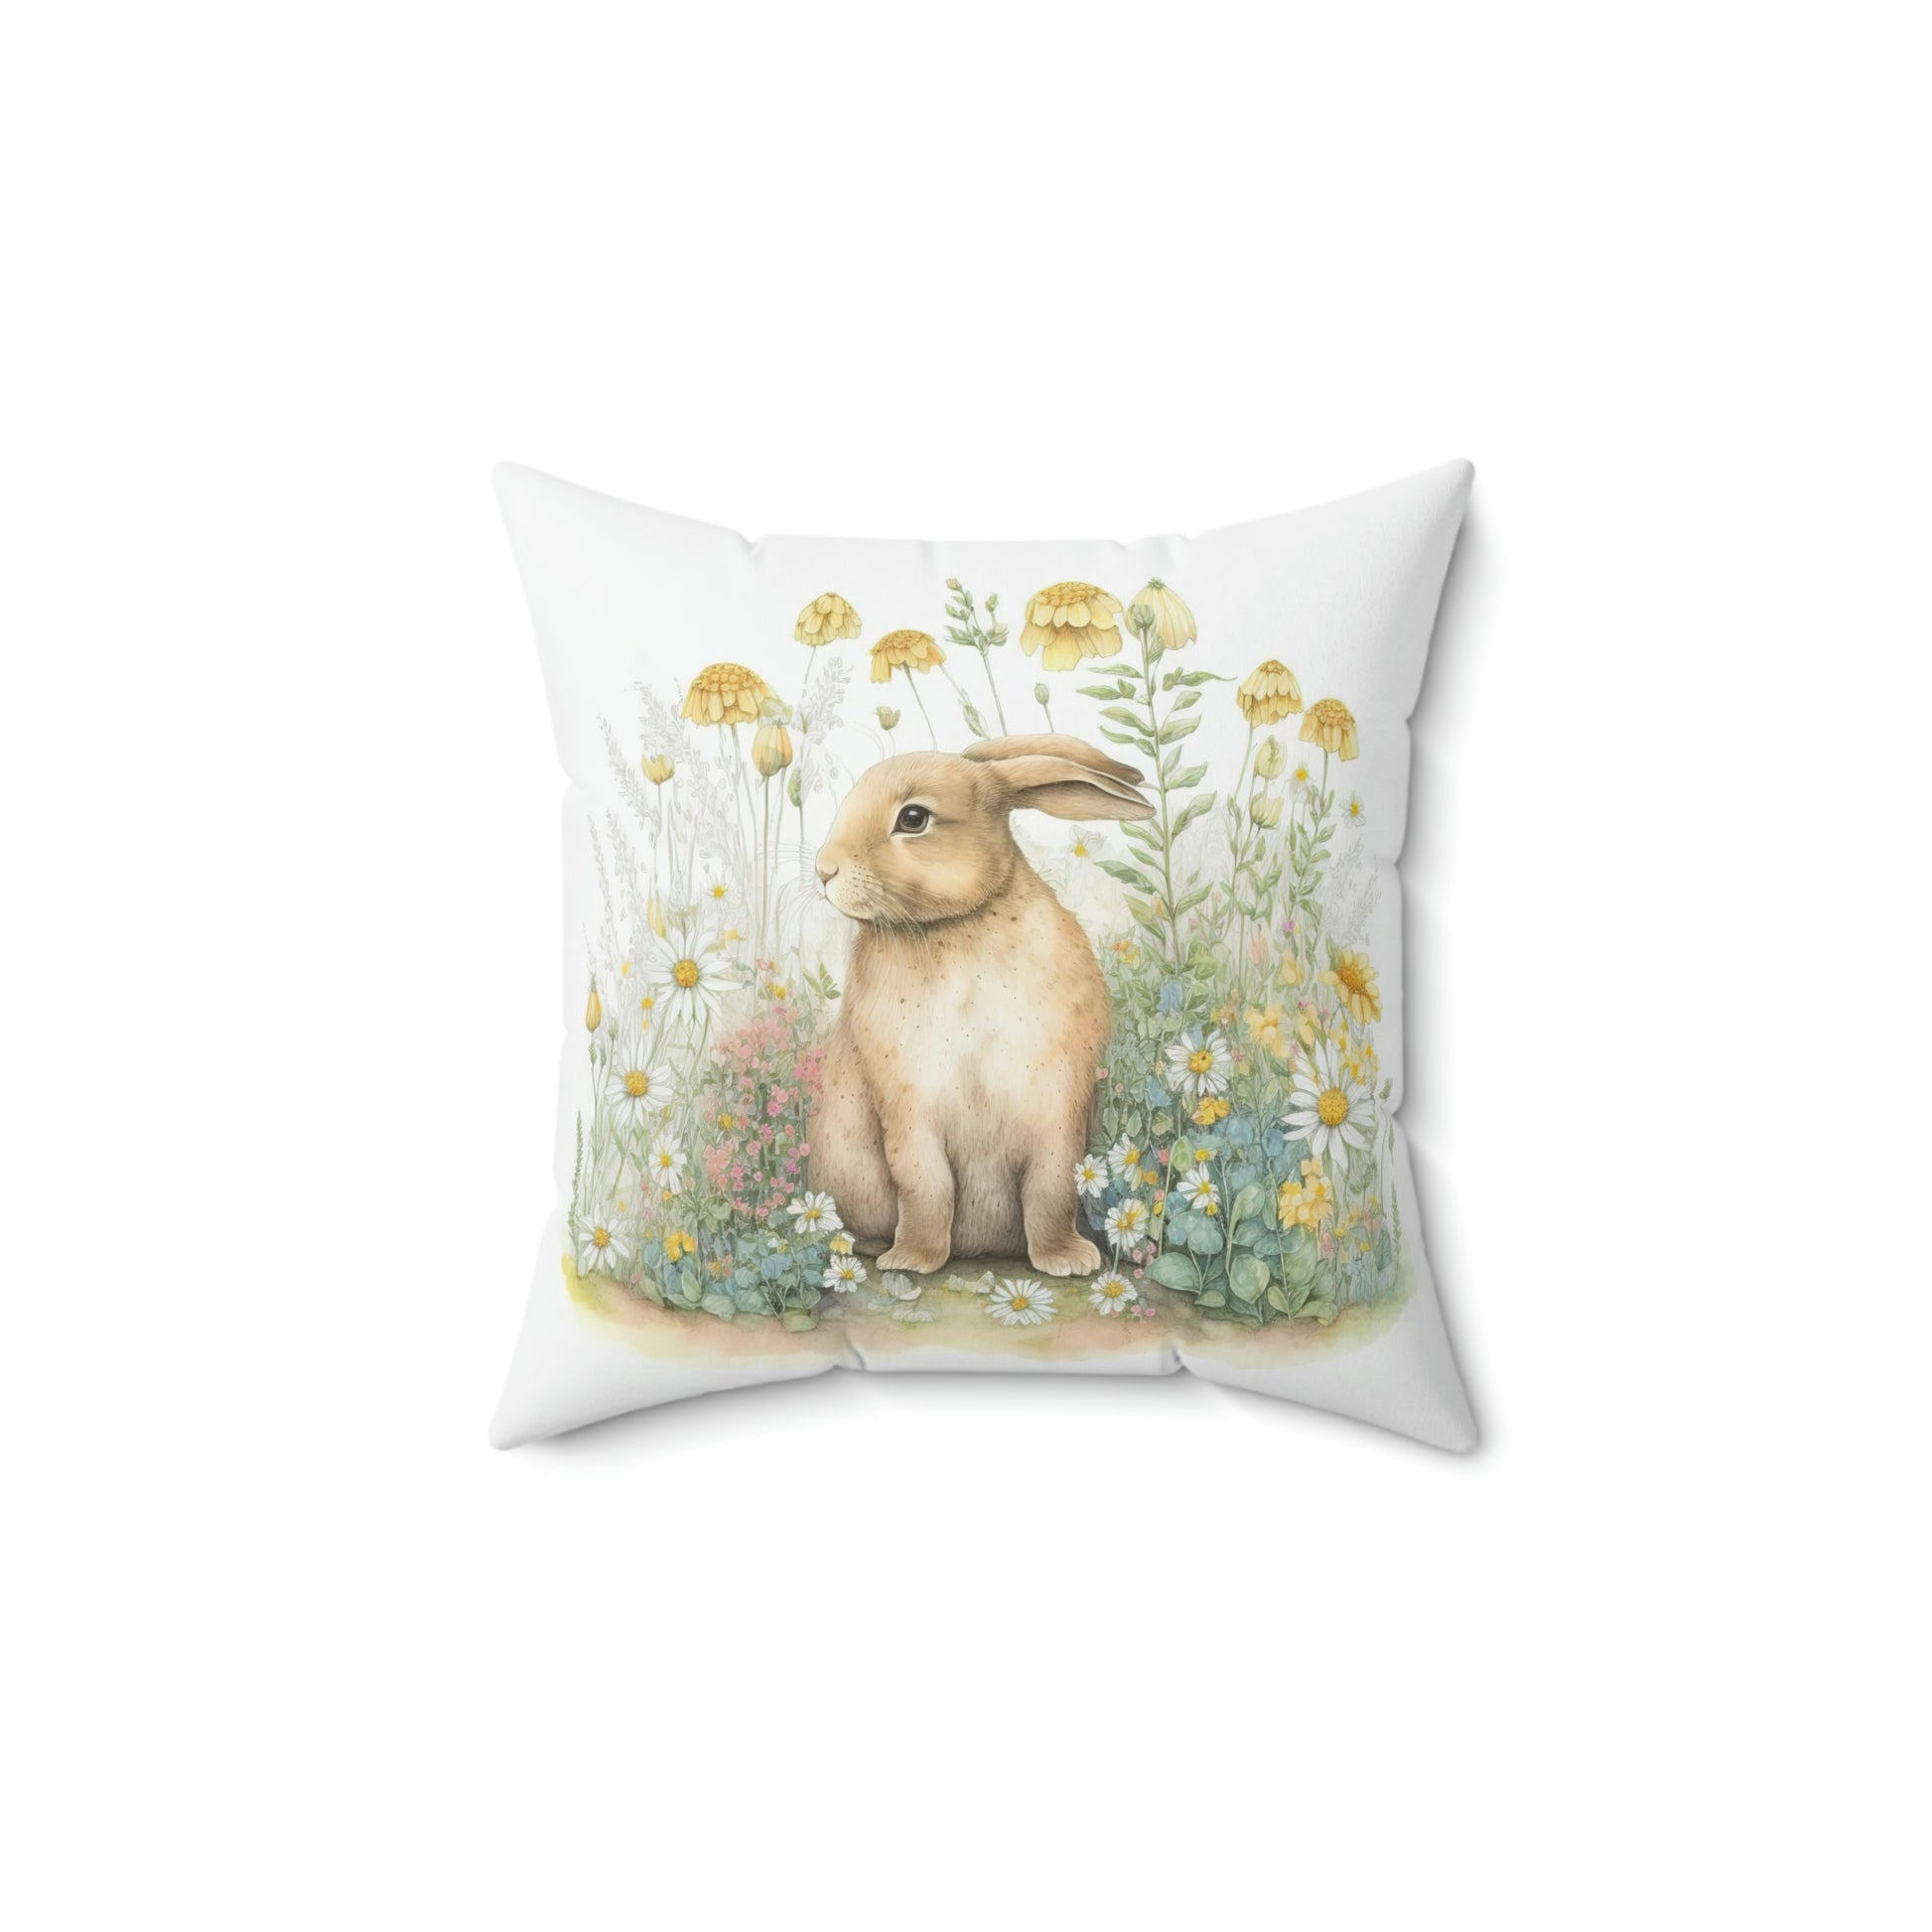 bunny accent throw pillow sitting on a grey living room couch, decorate your room for spring with this floral bunny pattern throw pillow, square pillow with a bunny pattern